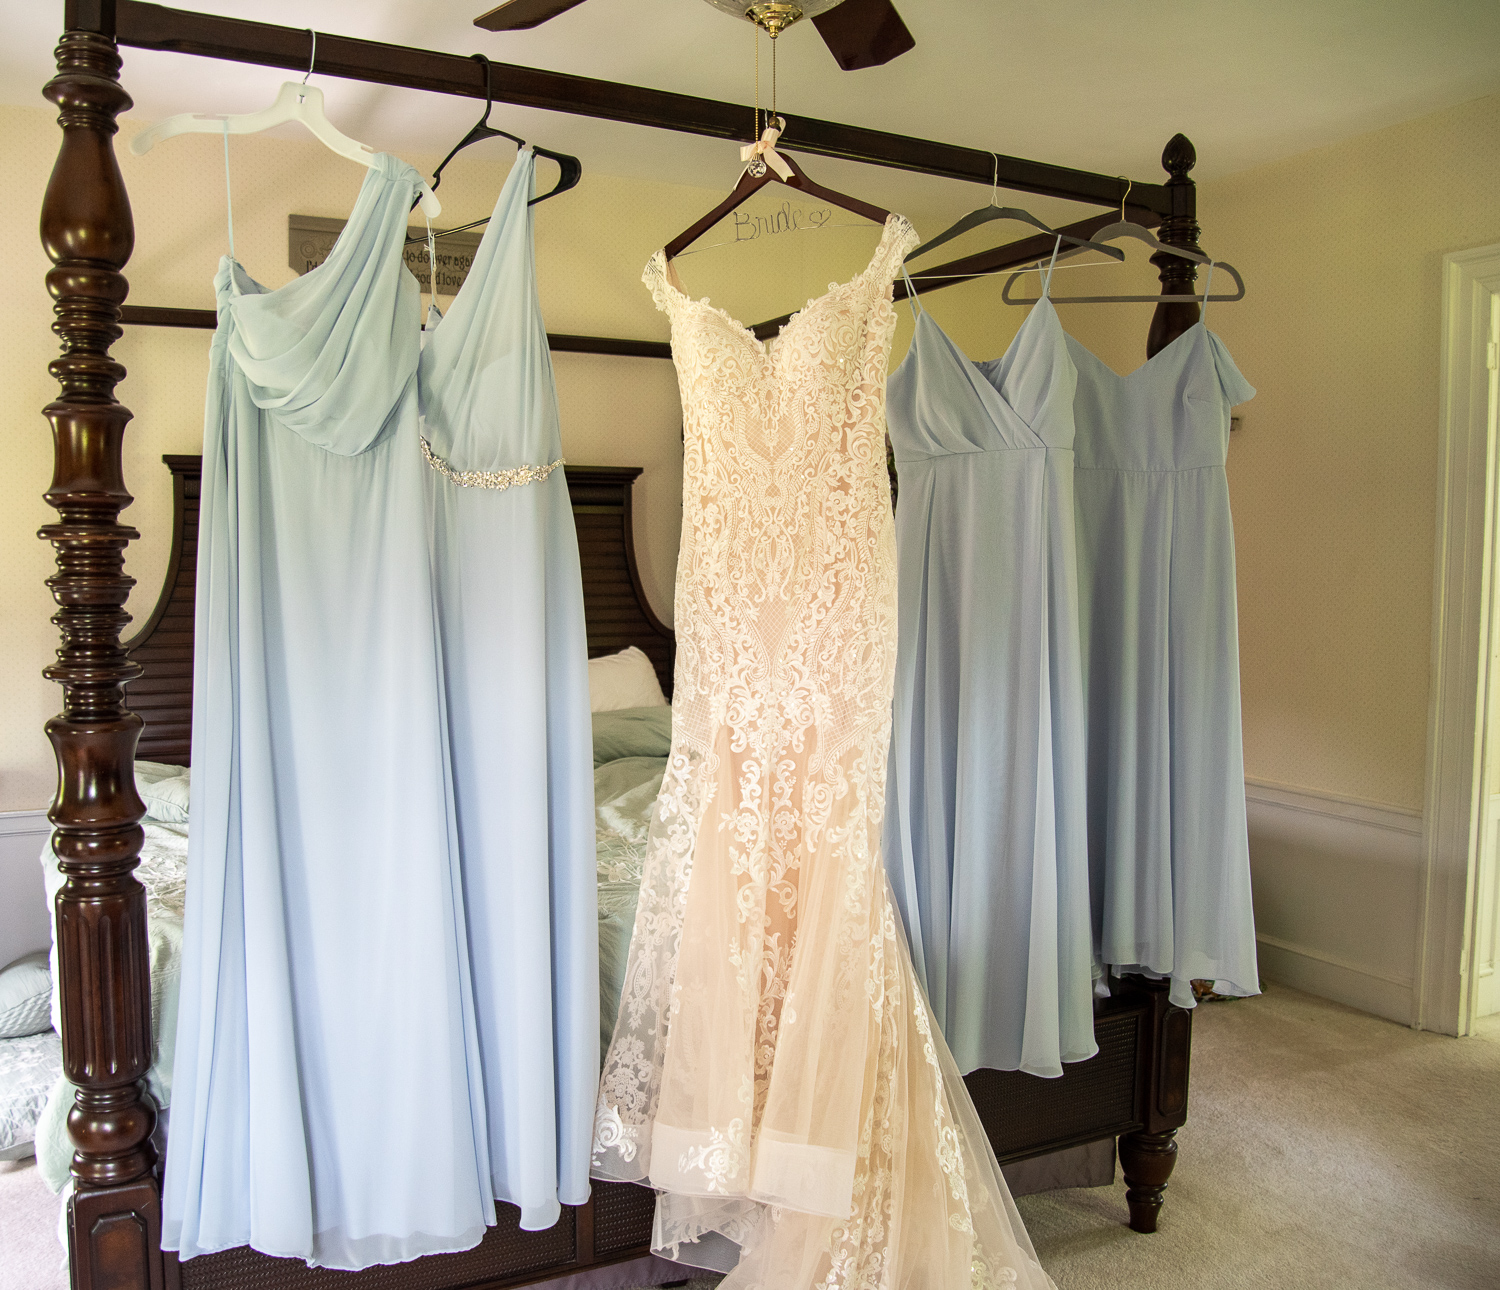 bride and bridesmaids dresses hanging on the bed 